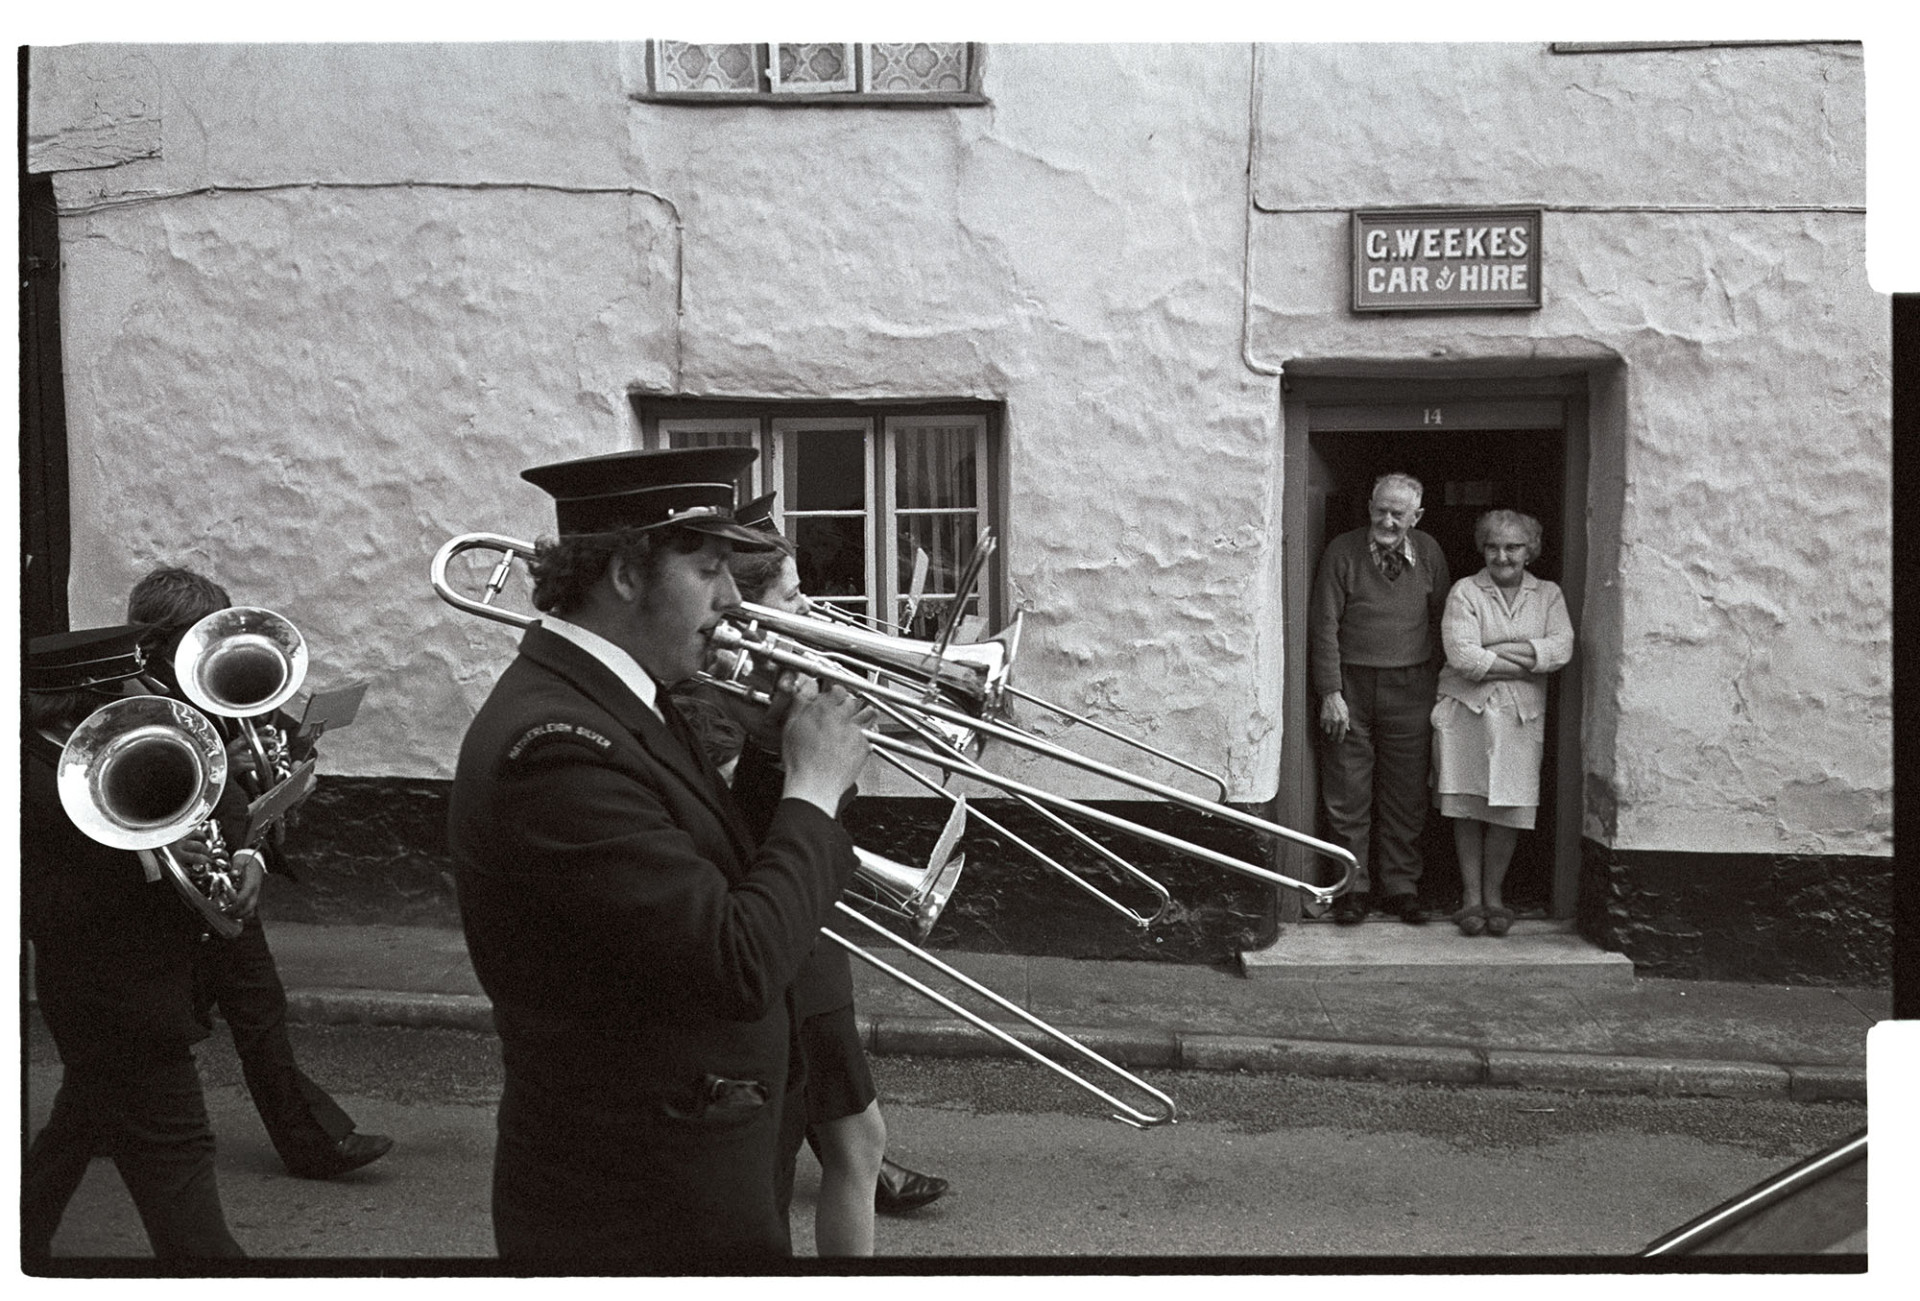 Victory parade with town band to celebrate winning football cup. Taxi Car hire behind.
[Couple standing in a doorway of G Weekes, car hire premises in Hatherleigh,  watching the Hatherleigh Silver Band march past in a parade to celebrate the town winning the football cup.]